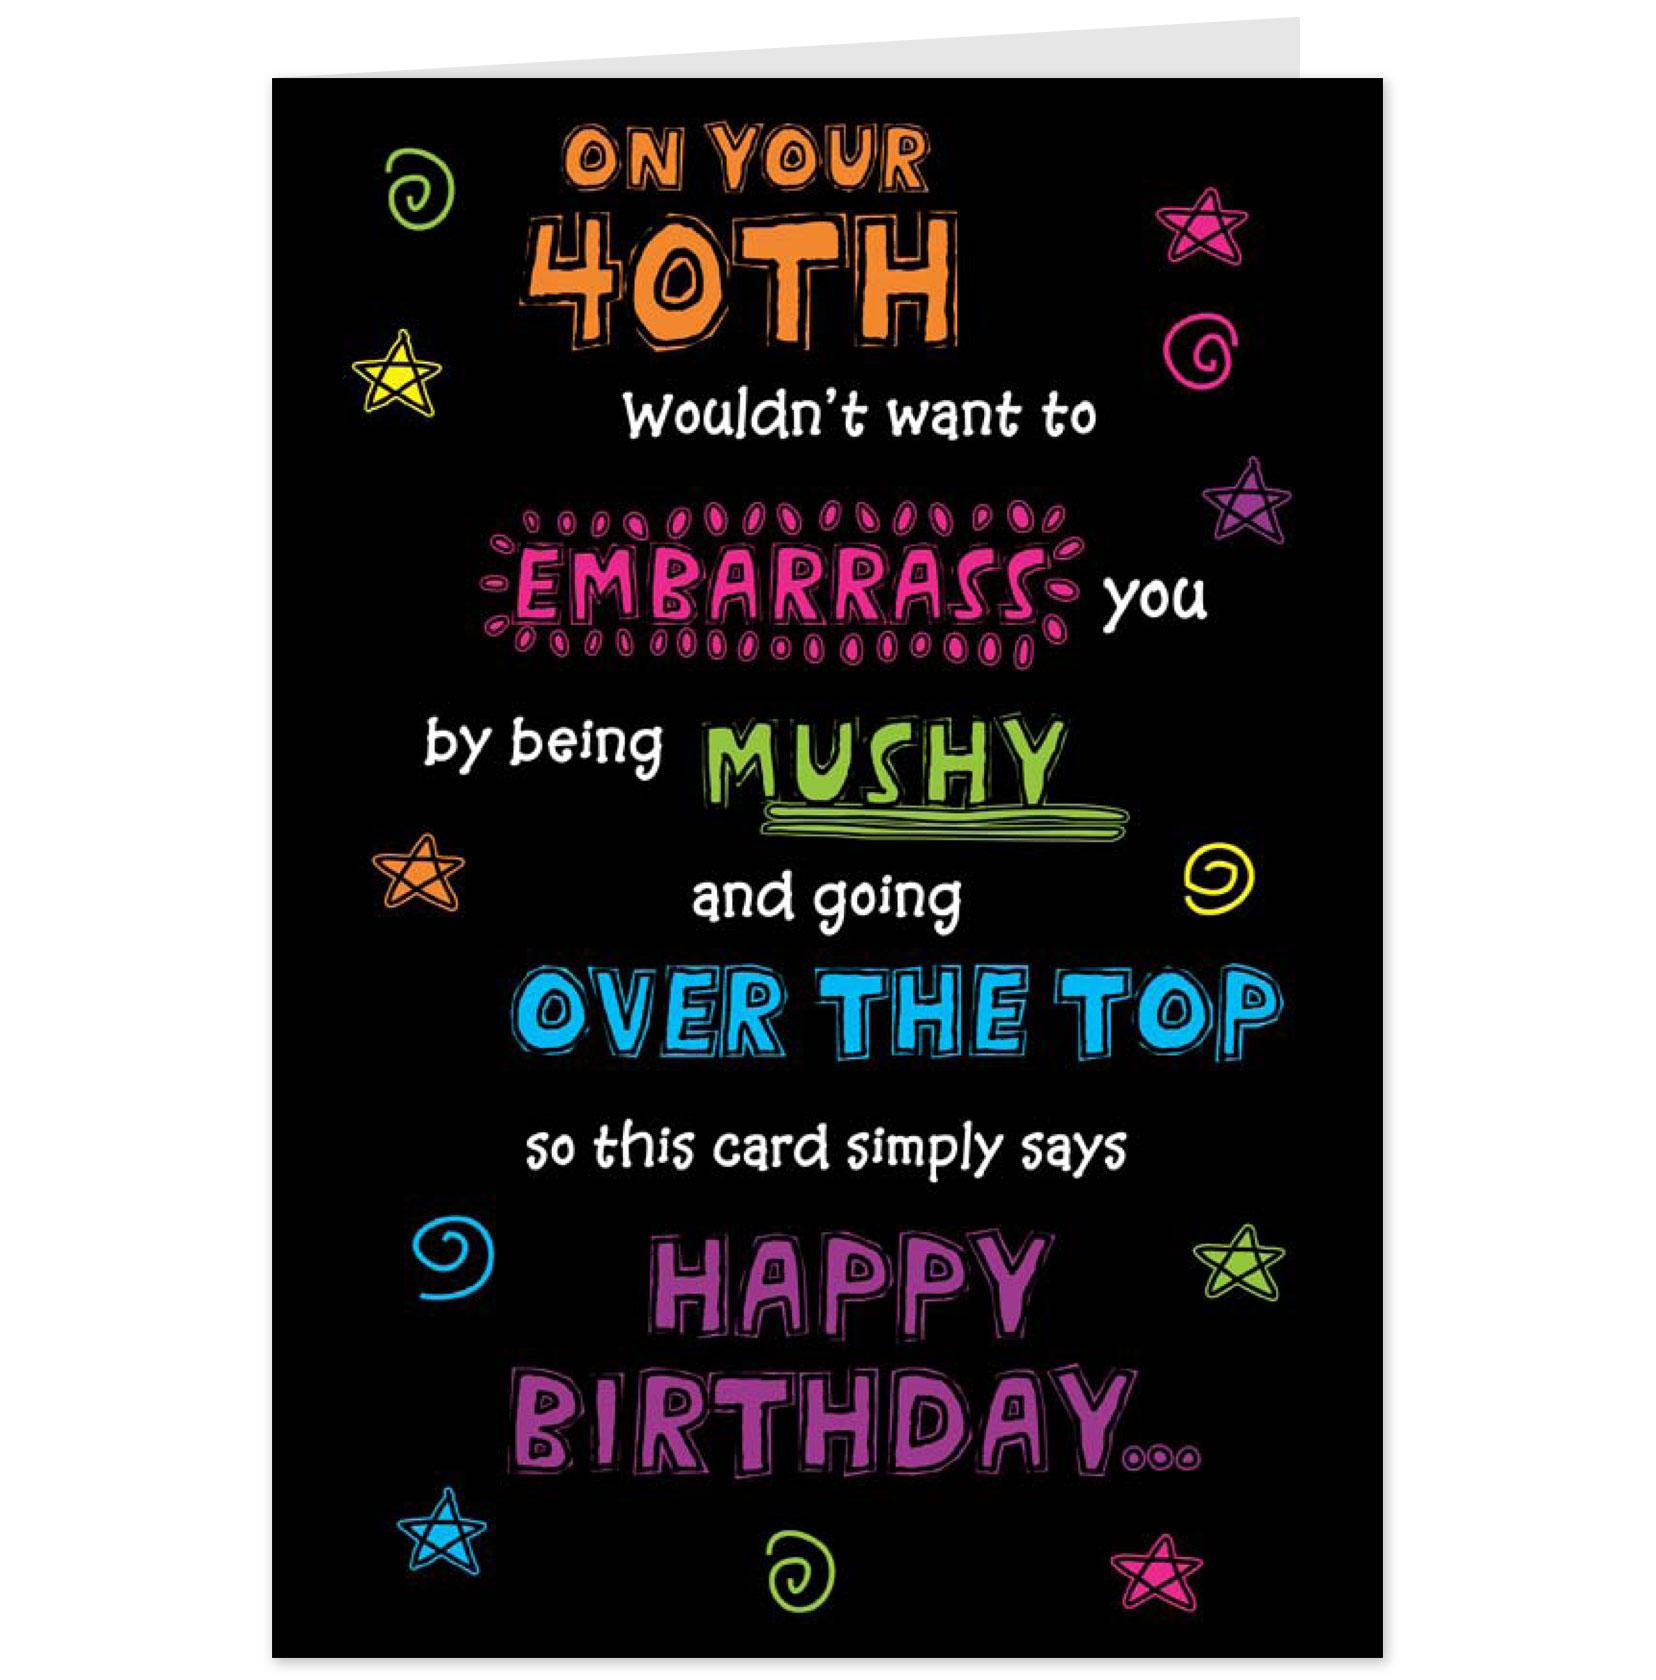 25 Of The Best Ideas For 40th Birthday Quotes Home Inspiration And Ideas Diy Crafts Quotes